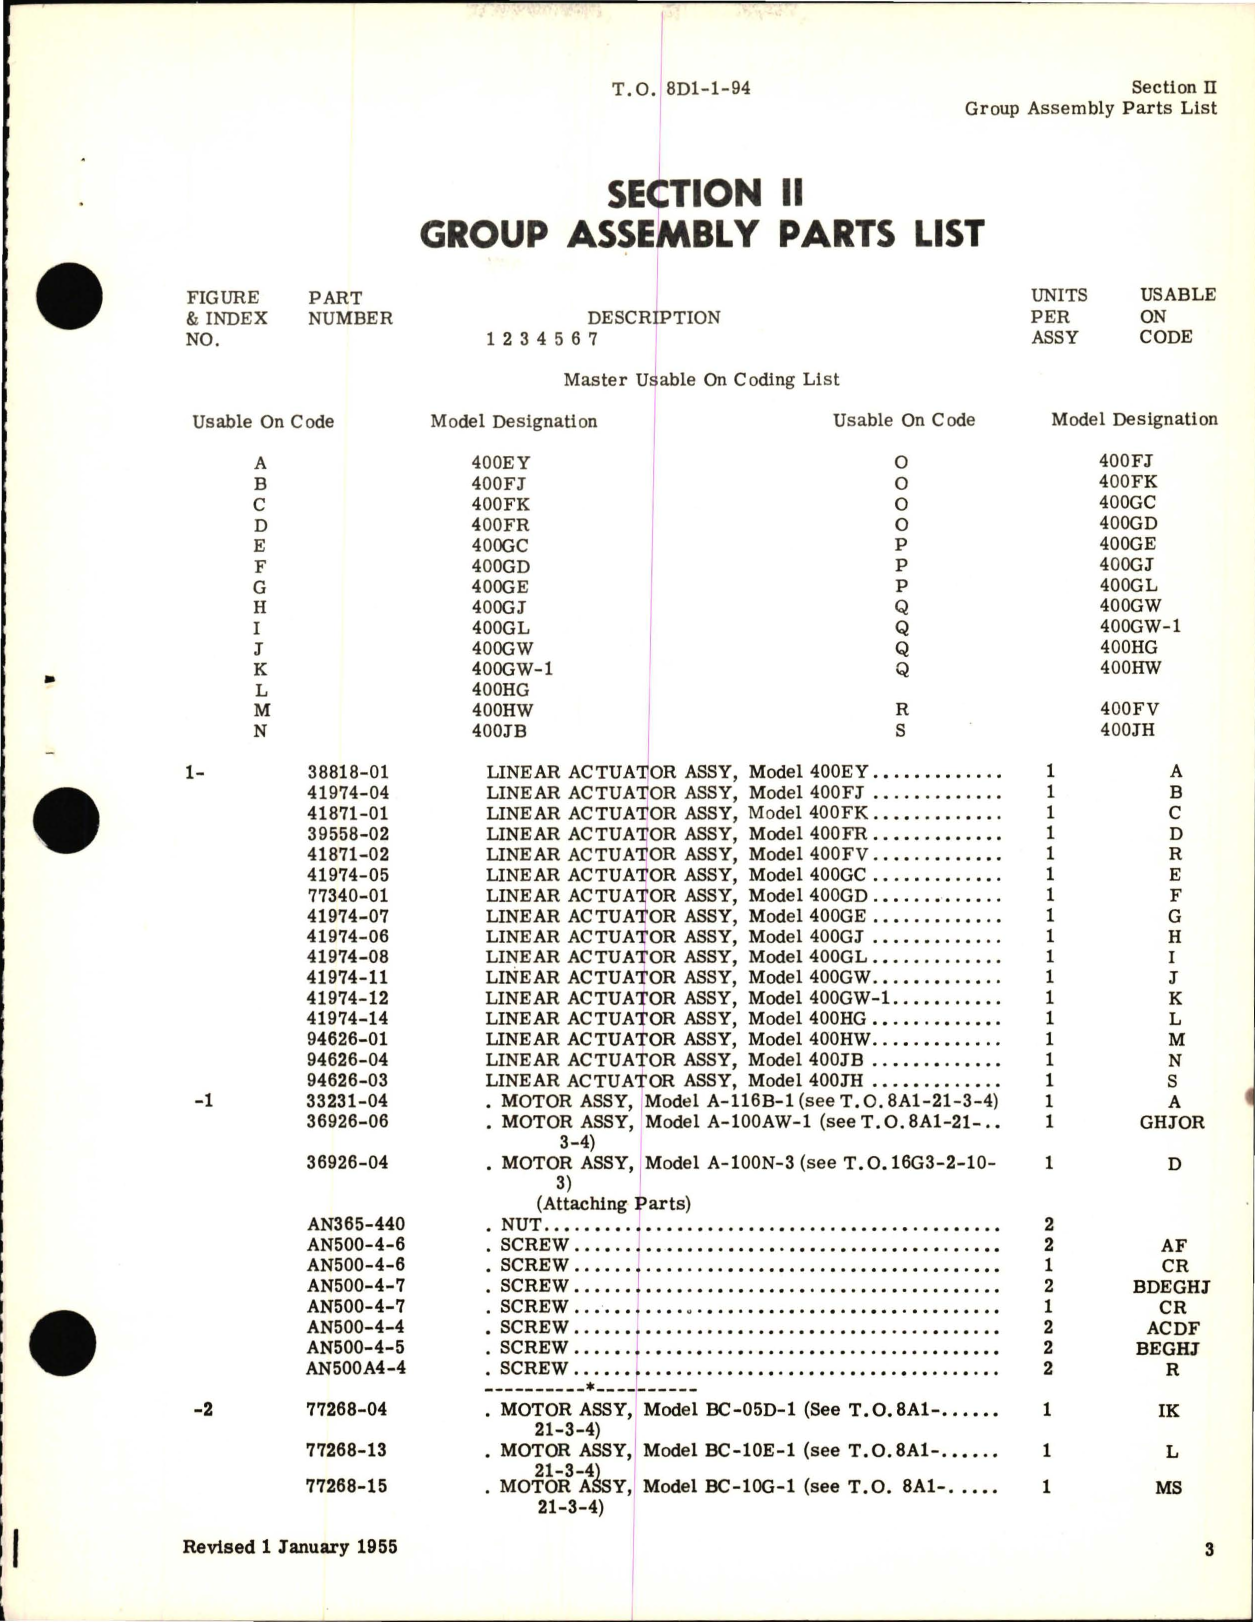 Sample page 7 from AirCorps Library document: Illustrated Parts Breakdown for Linear Actuator Assembly 400 Series